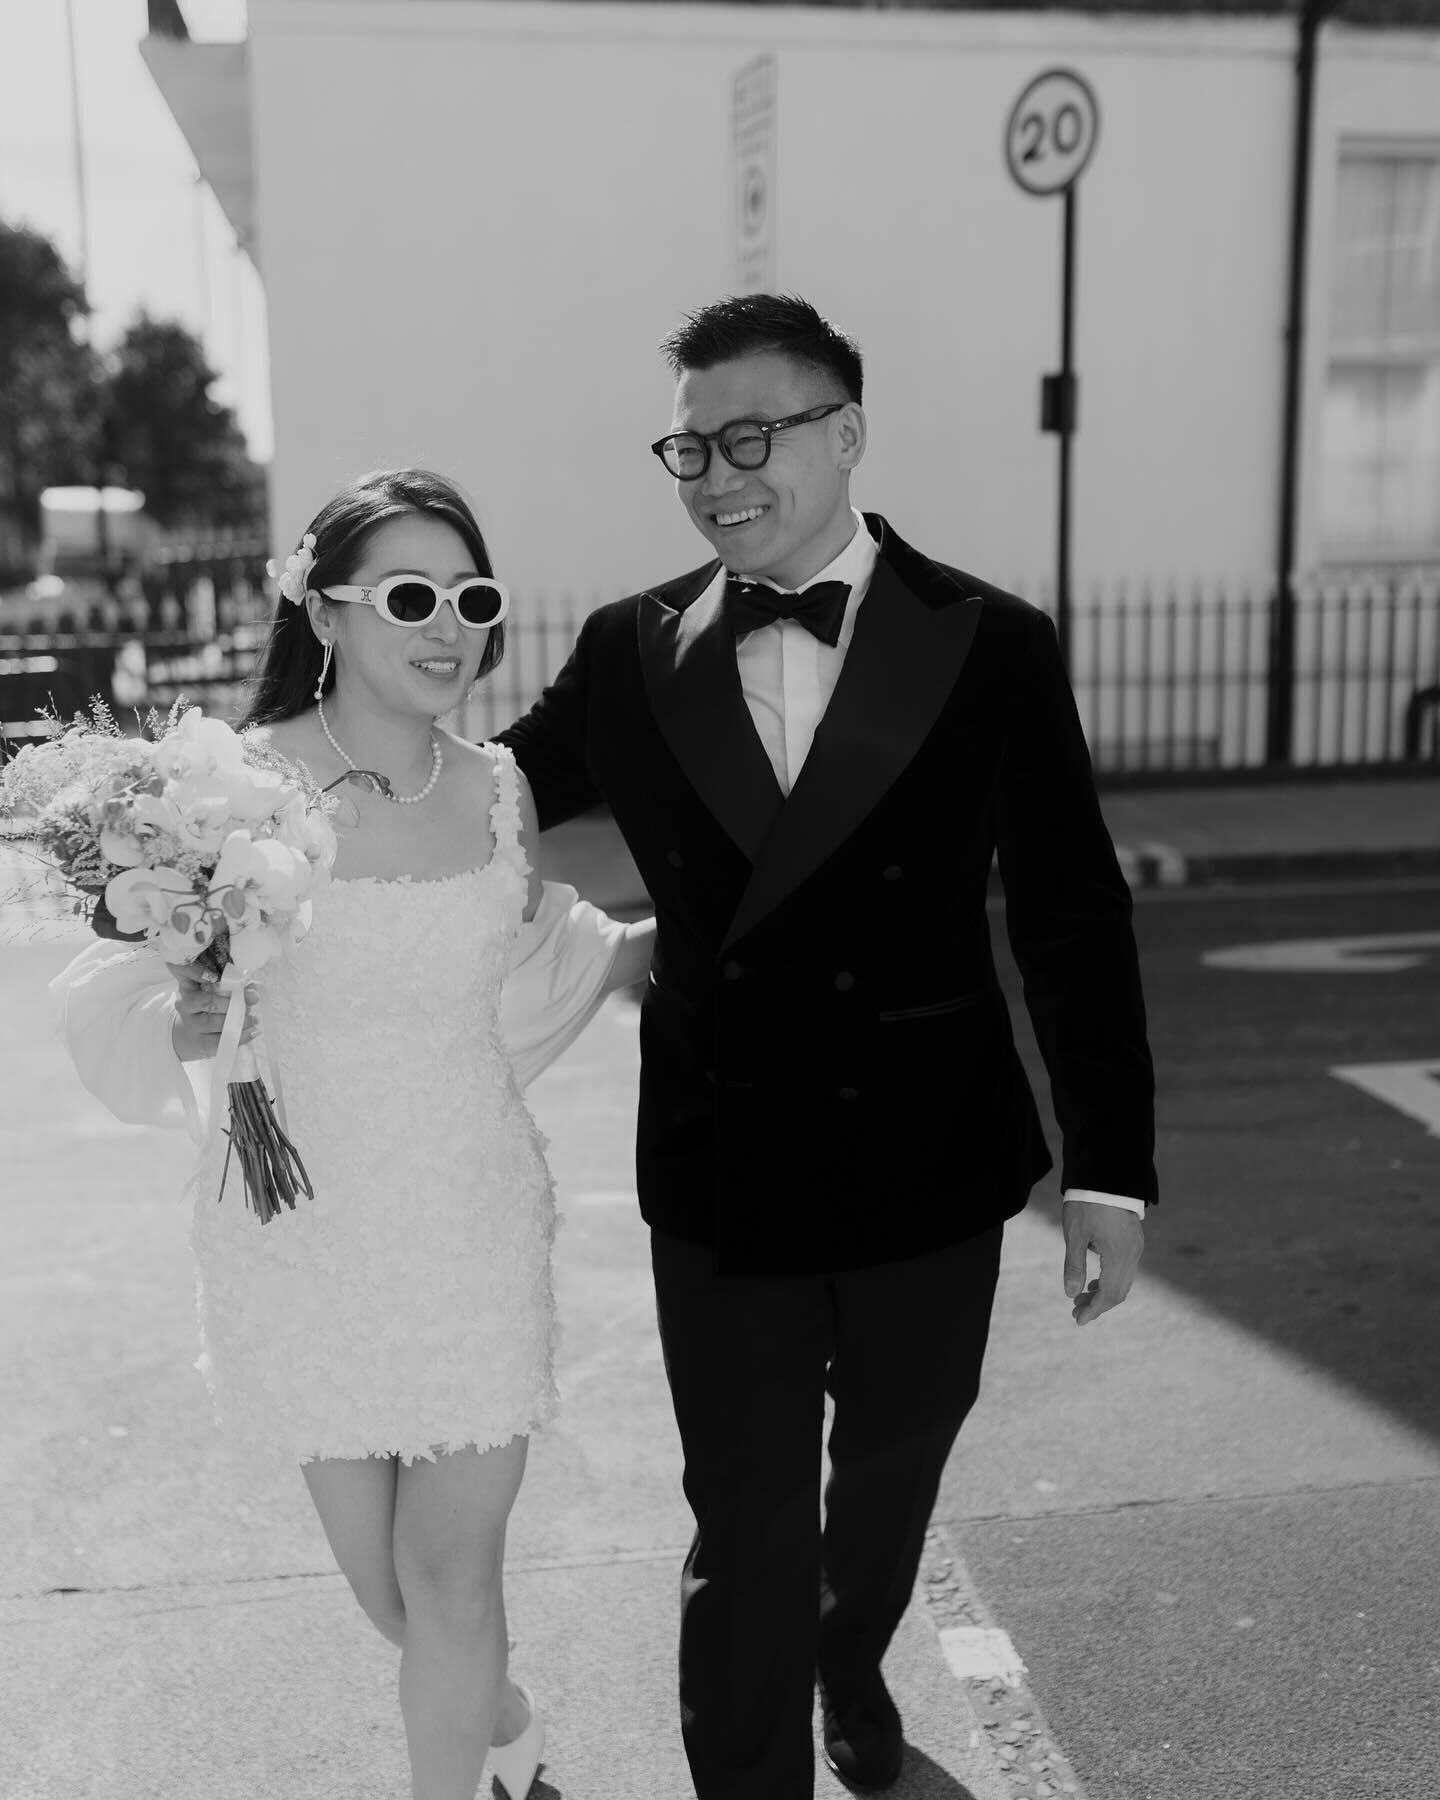 A glimpse into a London Elopement at Marylebone Town Hall with J&amp;Y

#editorialweddingphotography #londonwedding #londonelopement #londonweddingphotographer #londonelopementphotographer #londoneditorial #marylebonetownhall #maryleboneelopement